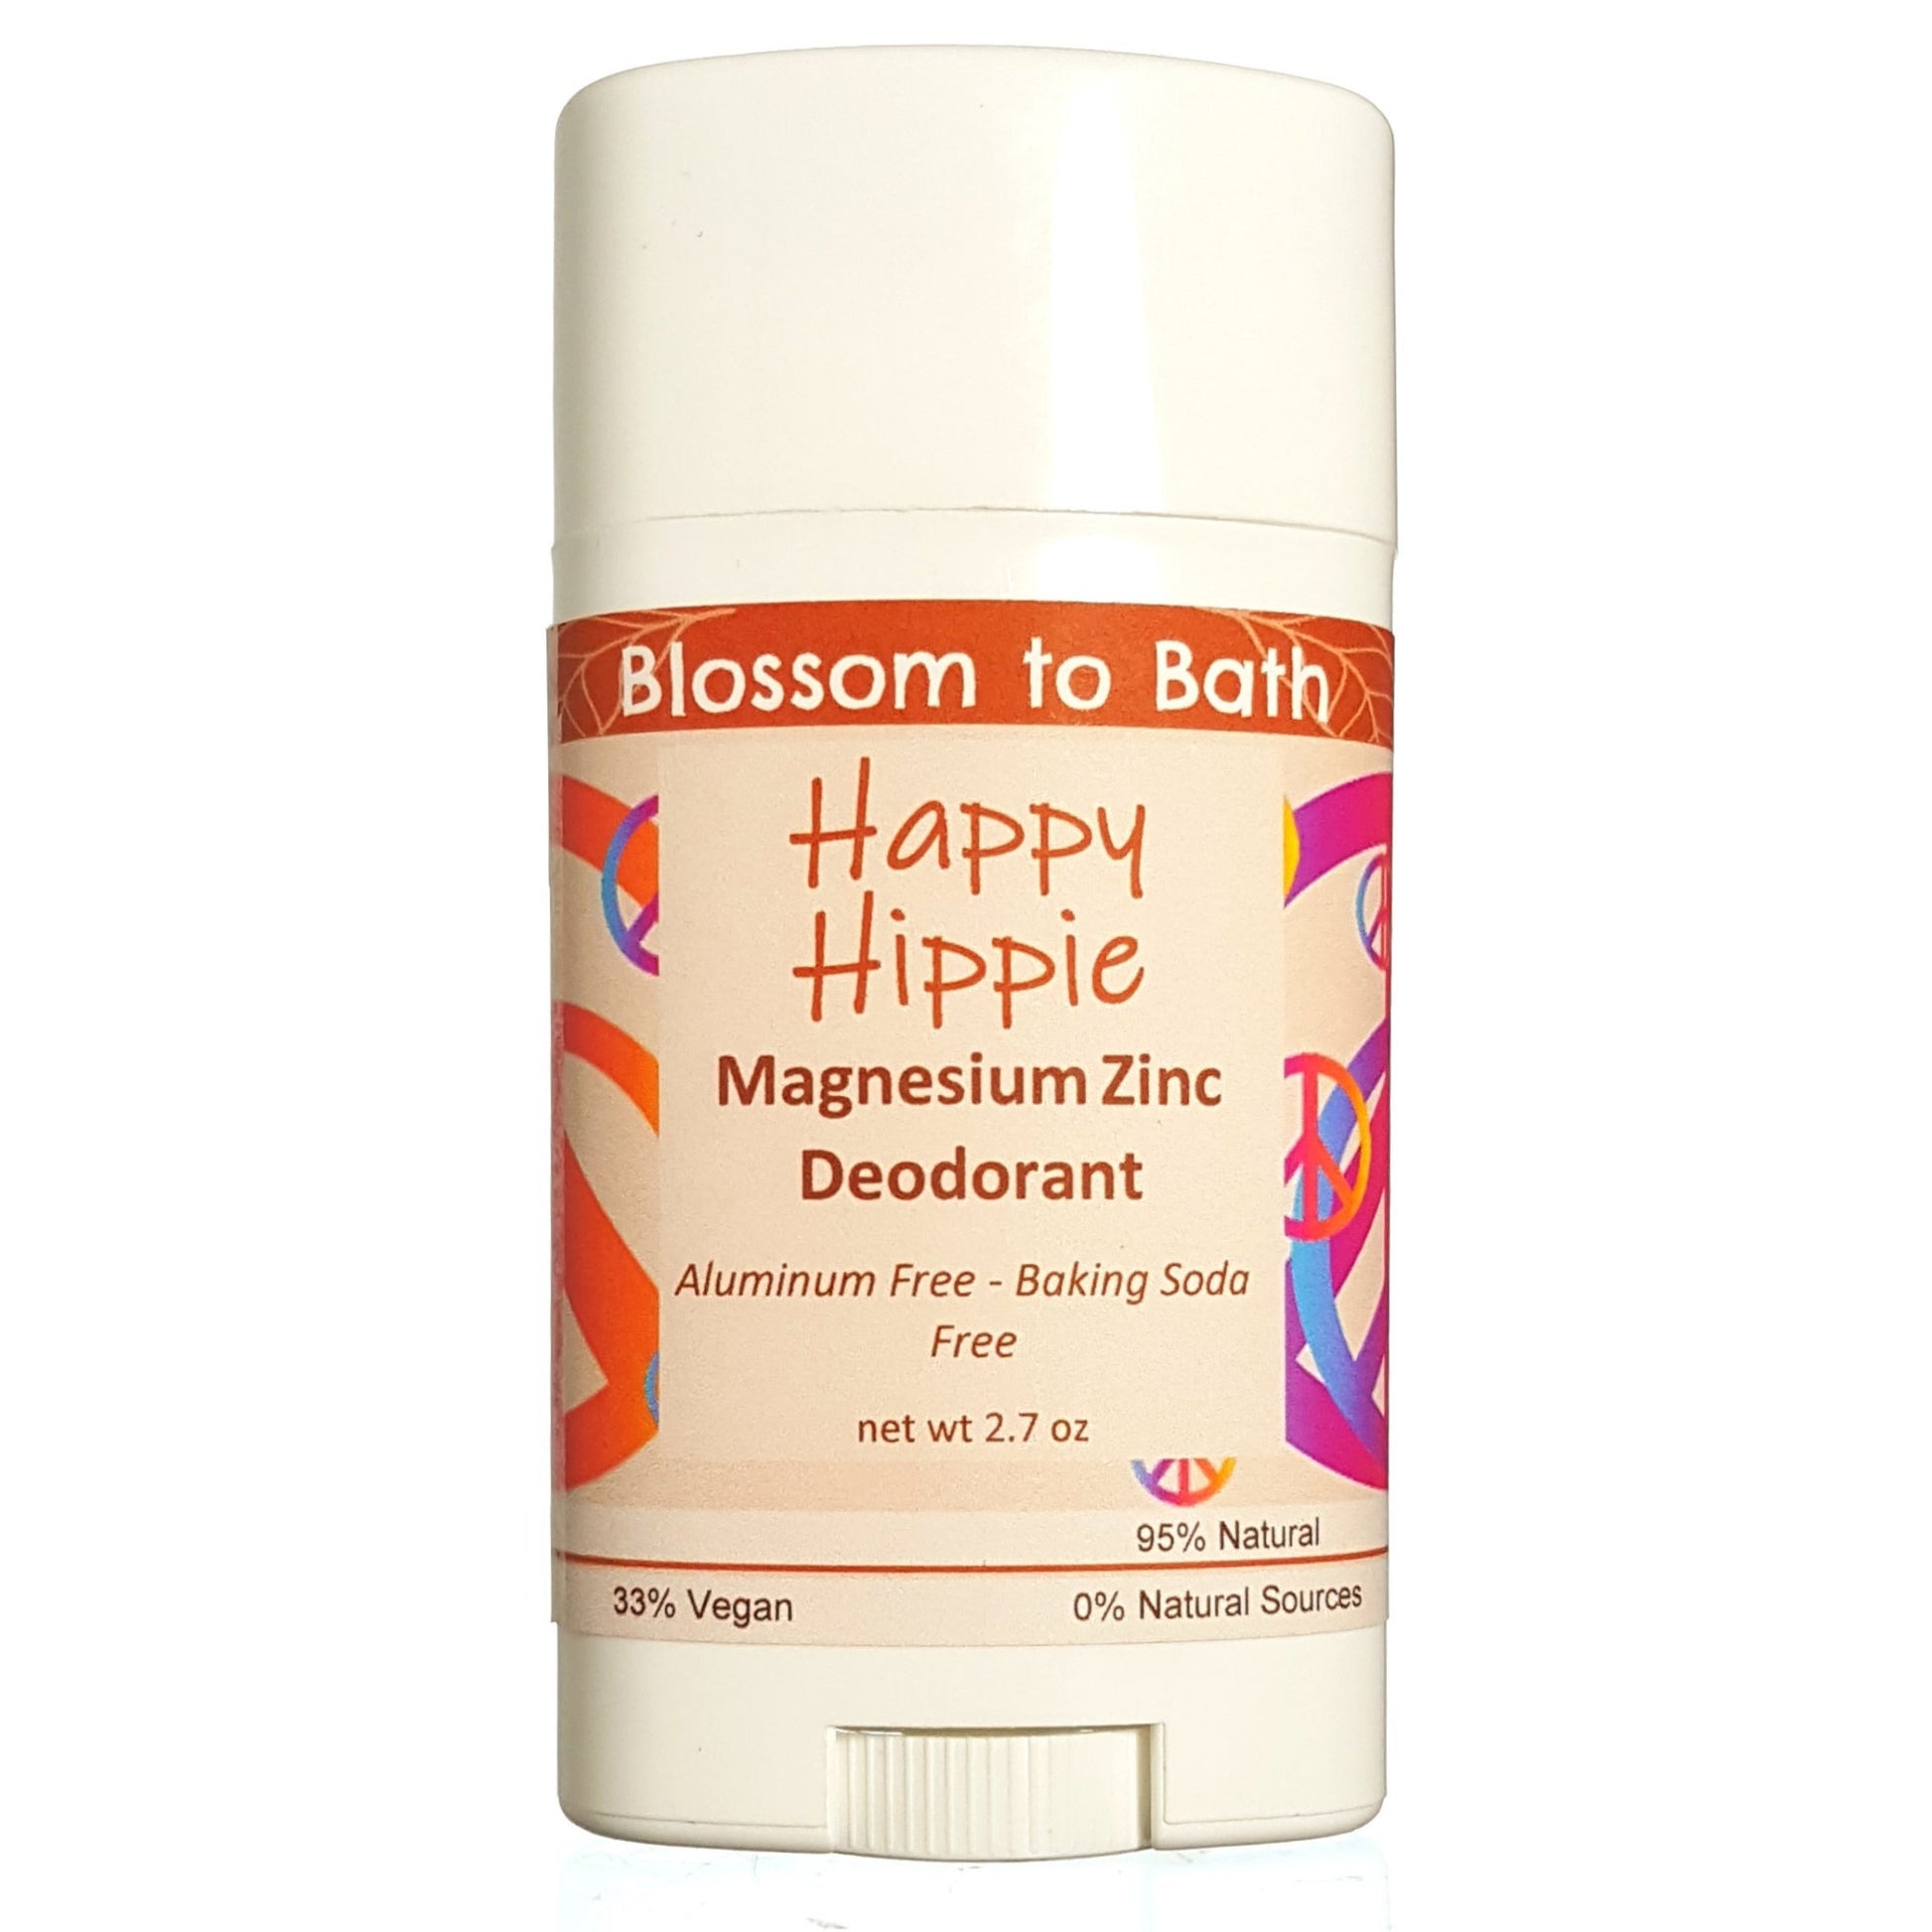 Buy Blossom to Bath Happy Hippie Magnesium Zinc Deodorant from Flowersong Soap Studio.  Long lasting protection made from organic botanicals and butters, made without baking soda, tested in the Arizona heat  A refreshing herbal fragrance that elevates your mood and your perspective.